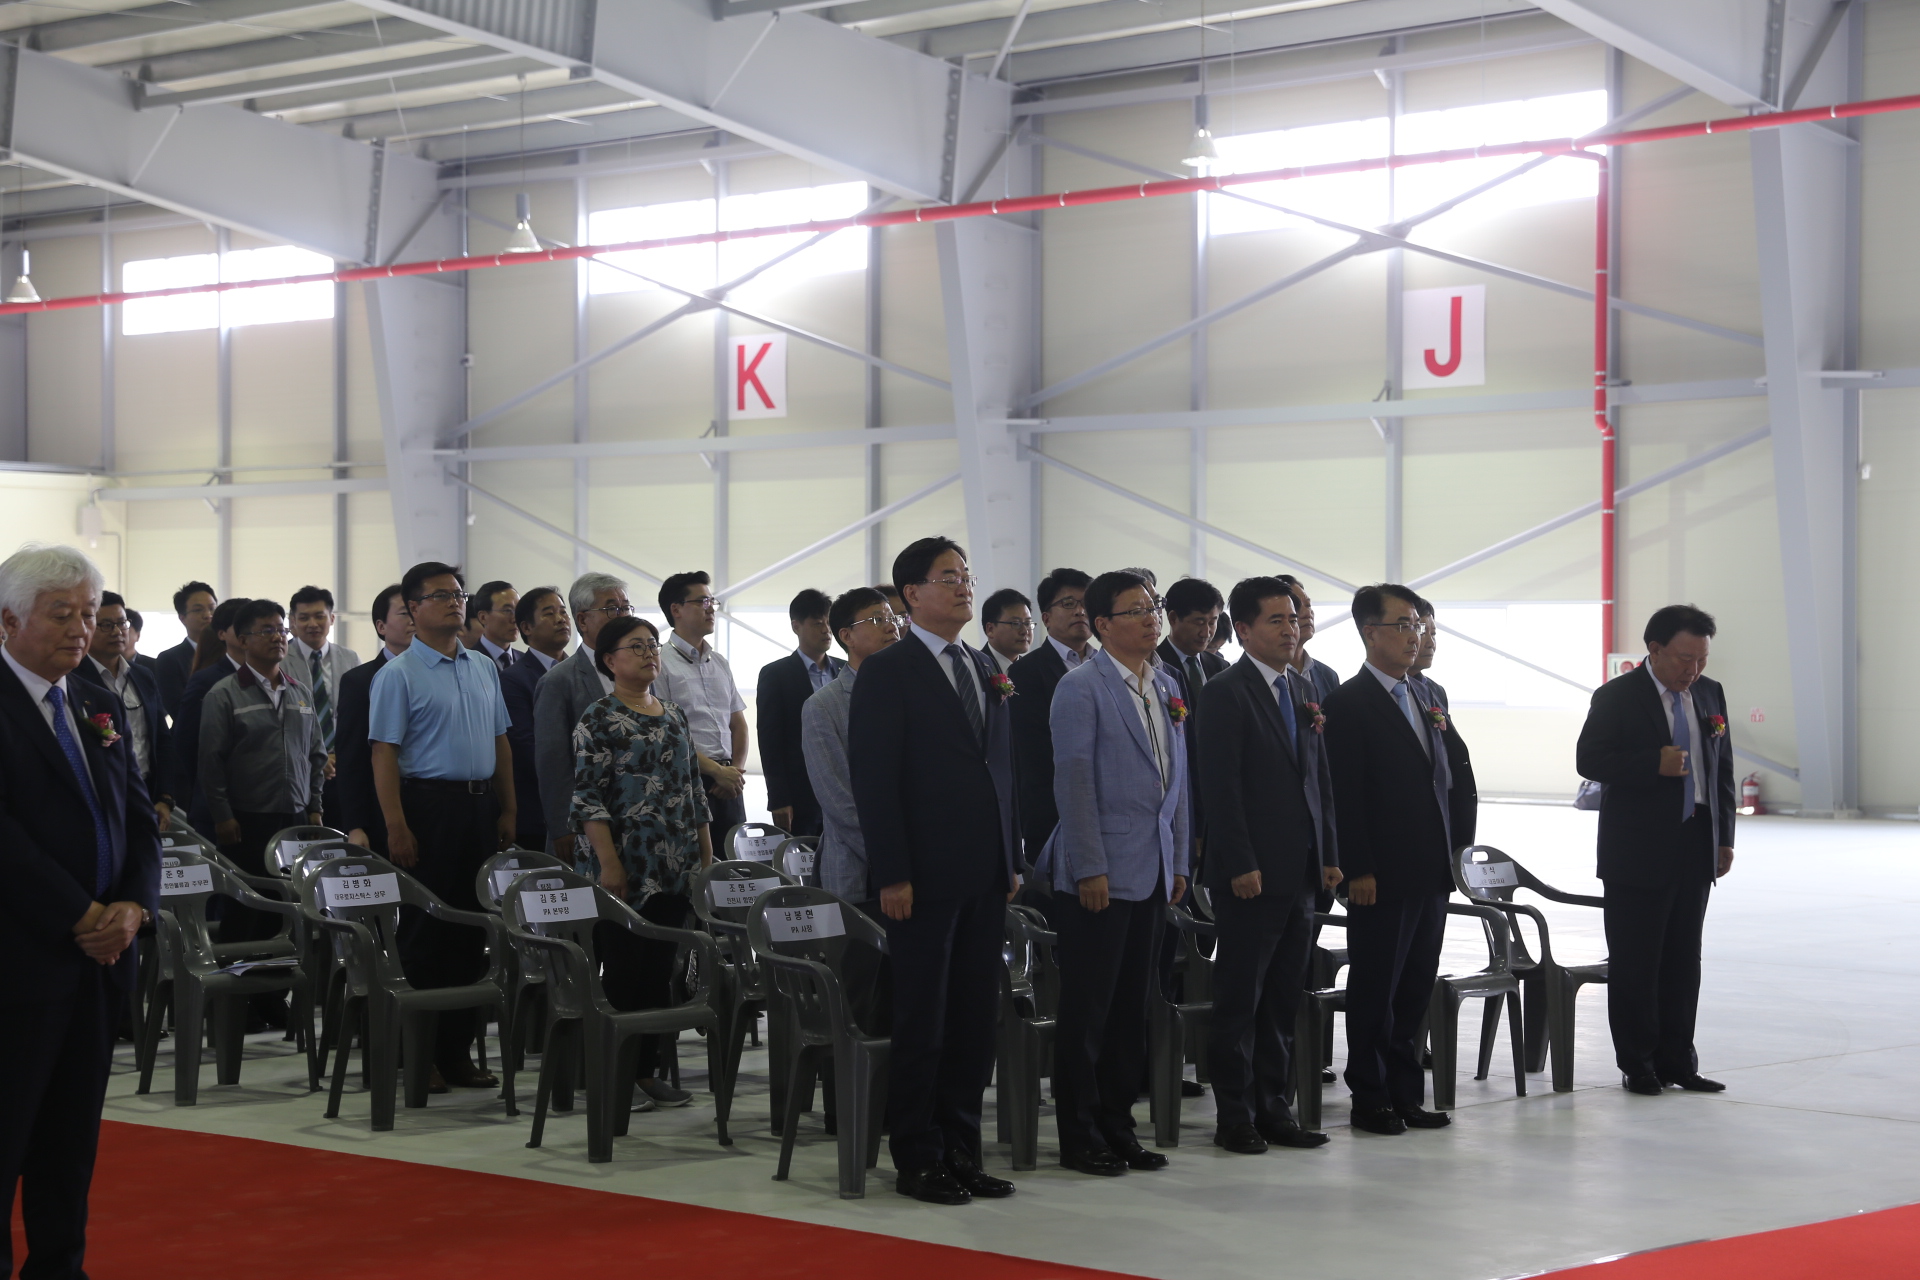 Completion ceremony for Incheon Cross Dock Co., Ltd’s LCL bonded warehouse in Incheon New Port was held on the 29th.